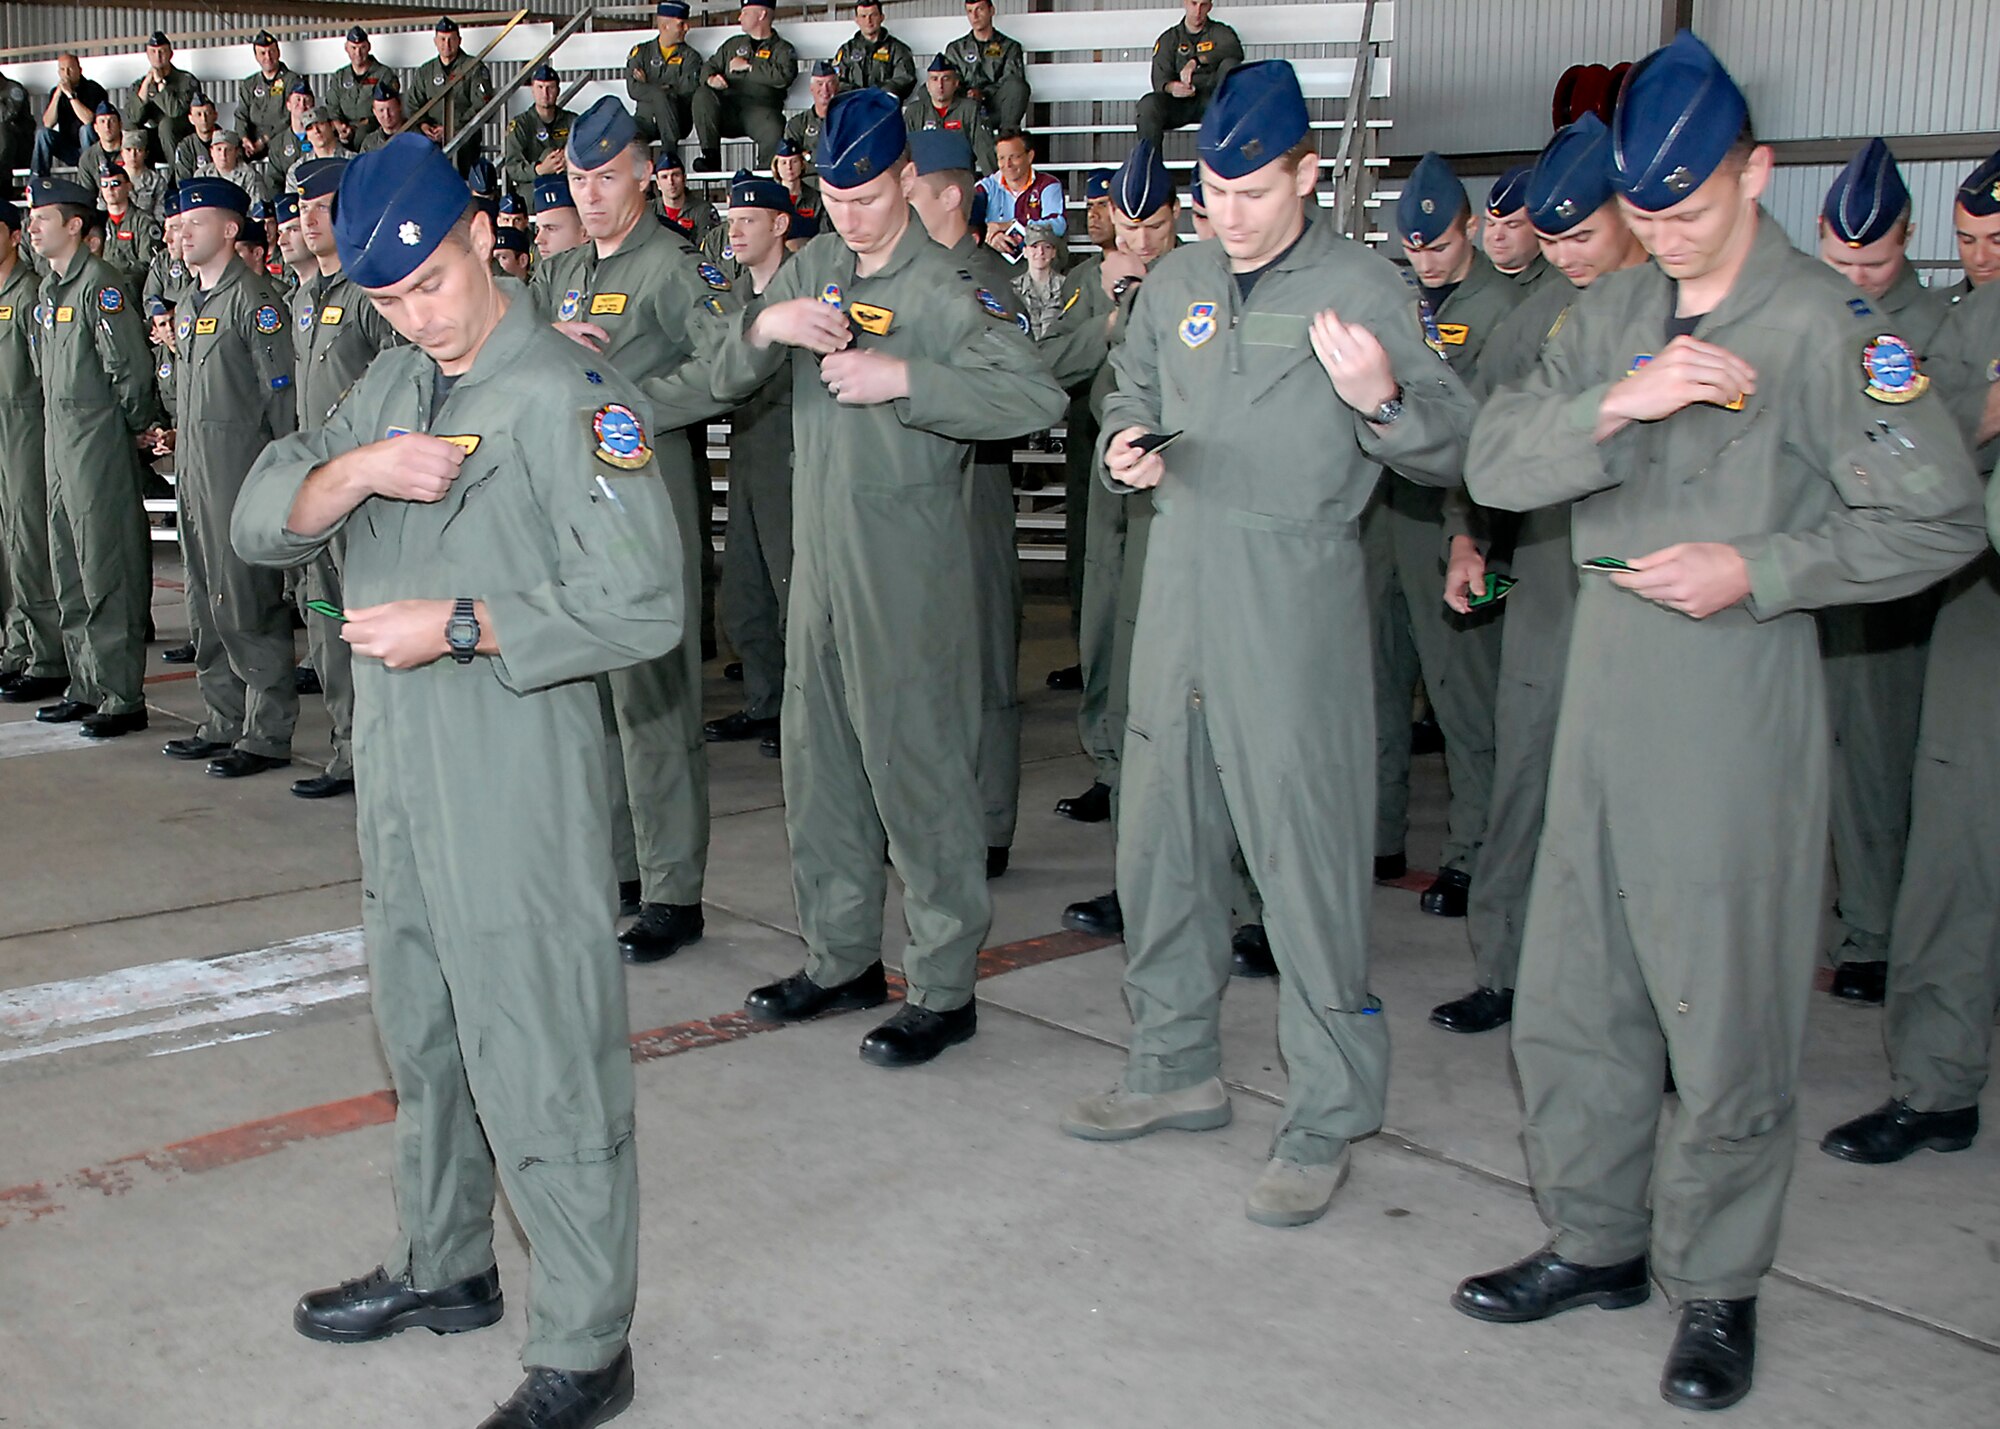 Members of the 90th Flying Training Squadron officially transferred to the 469th FTS when they removed their old squadron patch on their uniforms and replaced it with the 469th FTS patch at the 469th FTS reactivation ceremony April 10. The new squadron was reactivated to alleviate congestion in the 90th FTS.(U.S. Air Force photo/Mike Litteken)